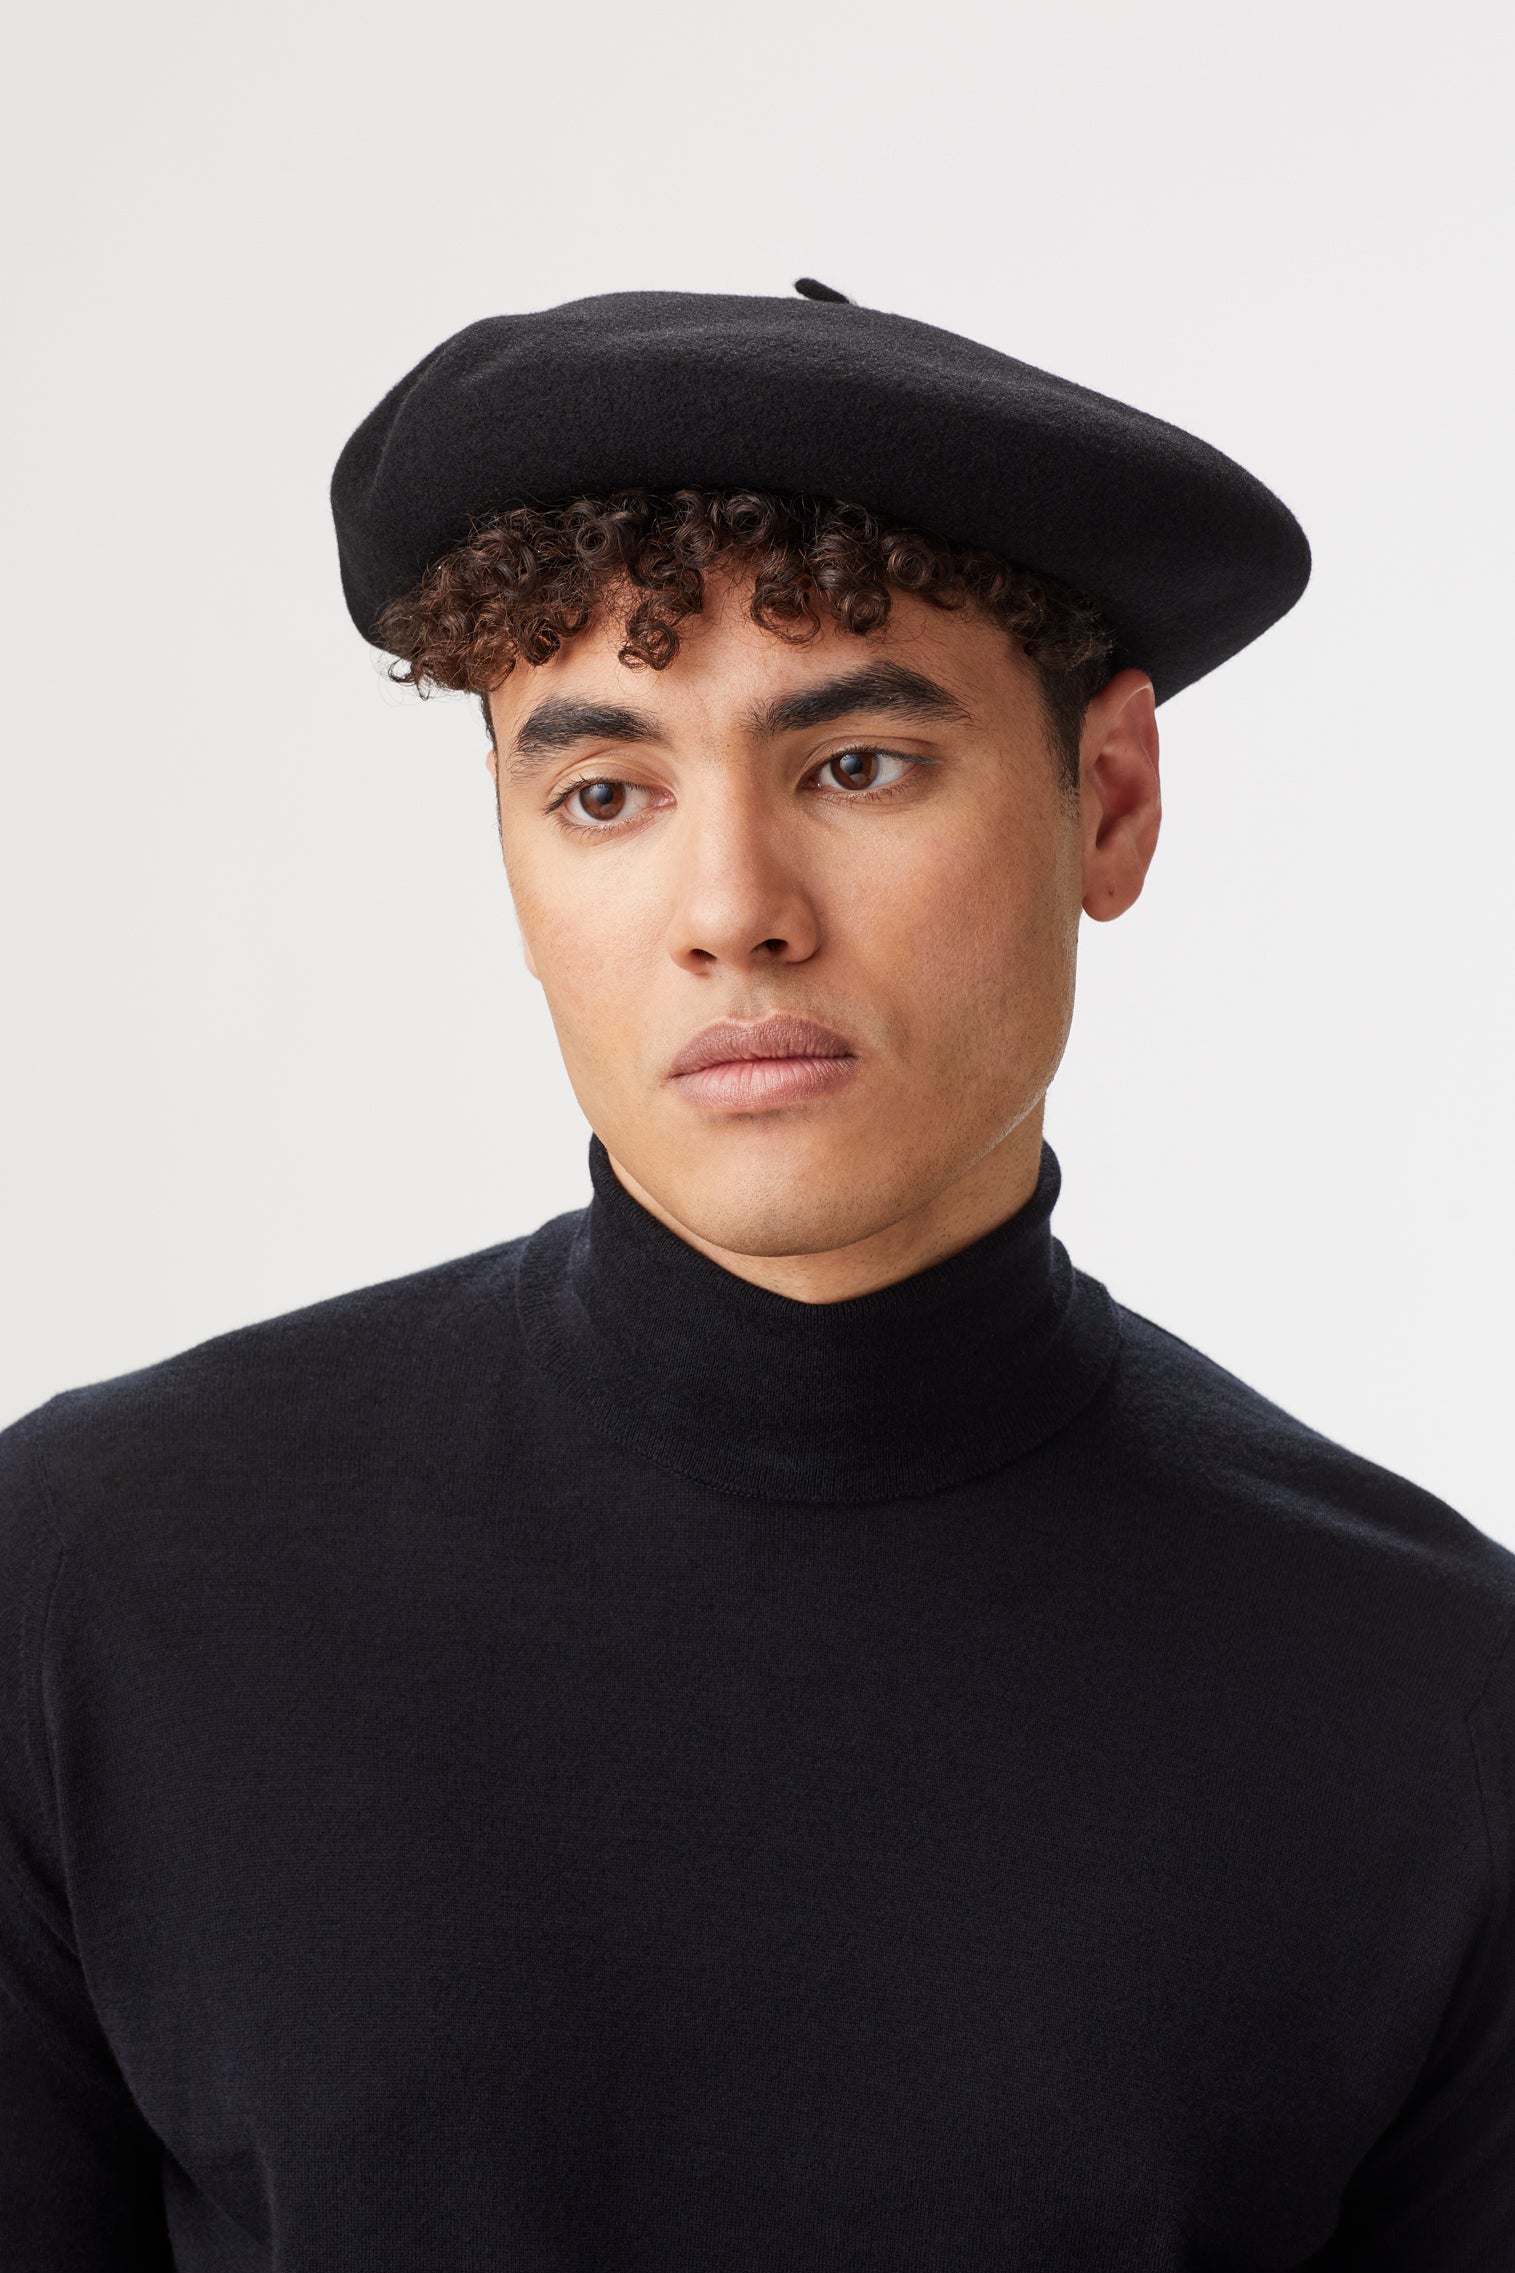 Basque Beret - Hats for Round Face Shapes - Lock & Co. Hatters London UK